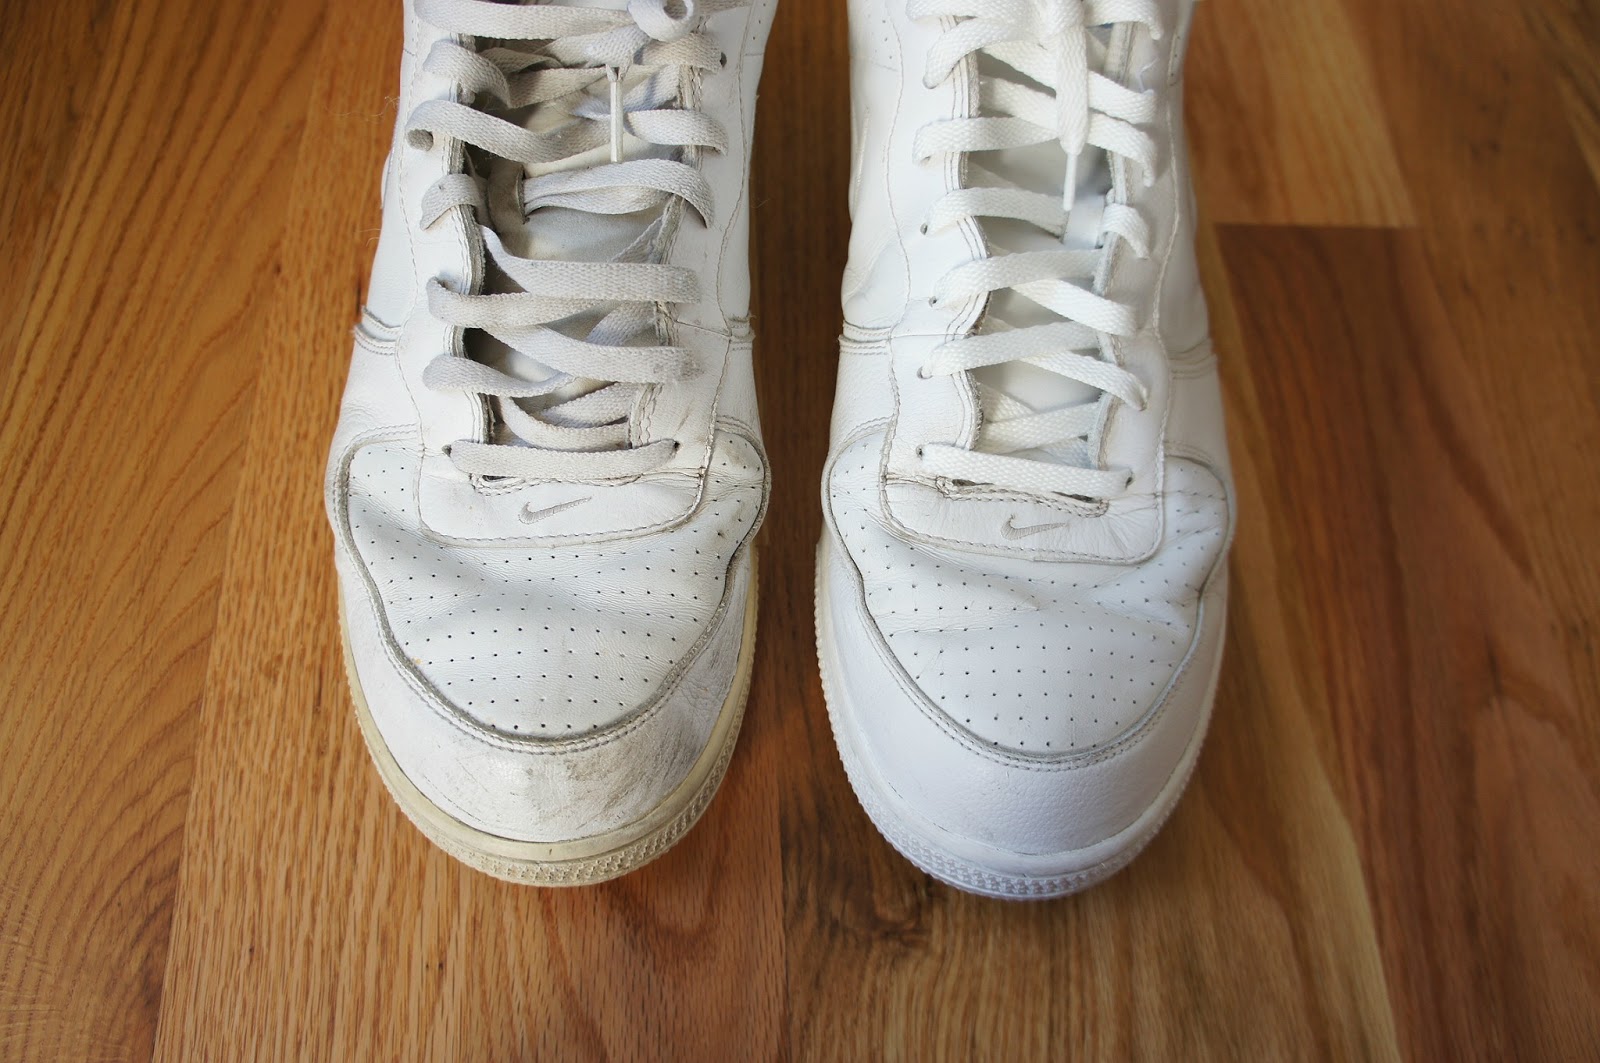 Positively Amy: DIY: How to Clean White Sneakers